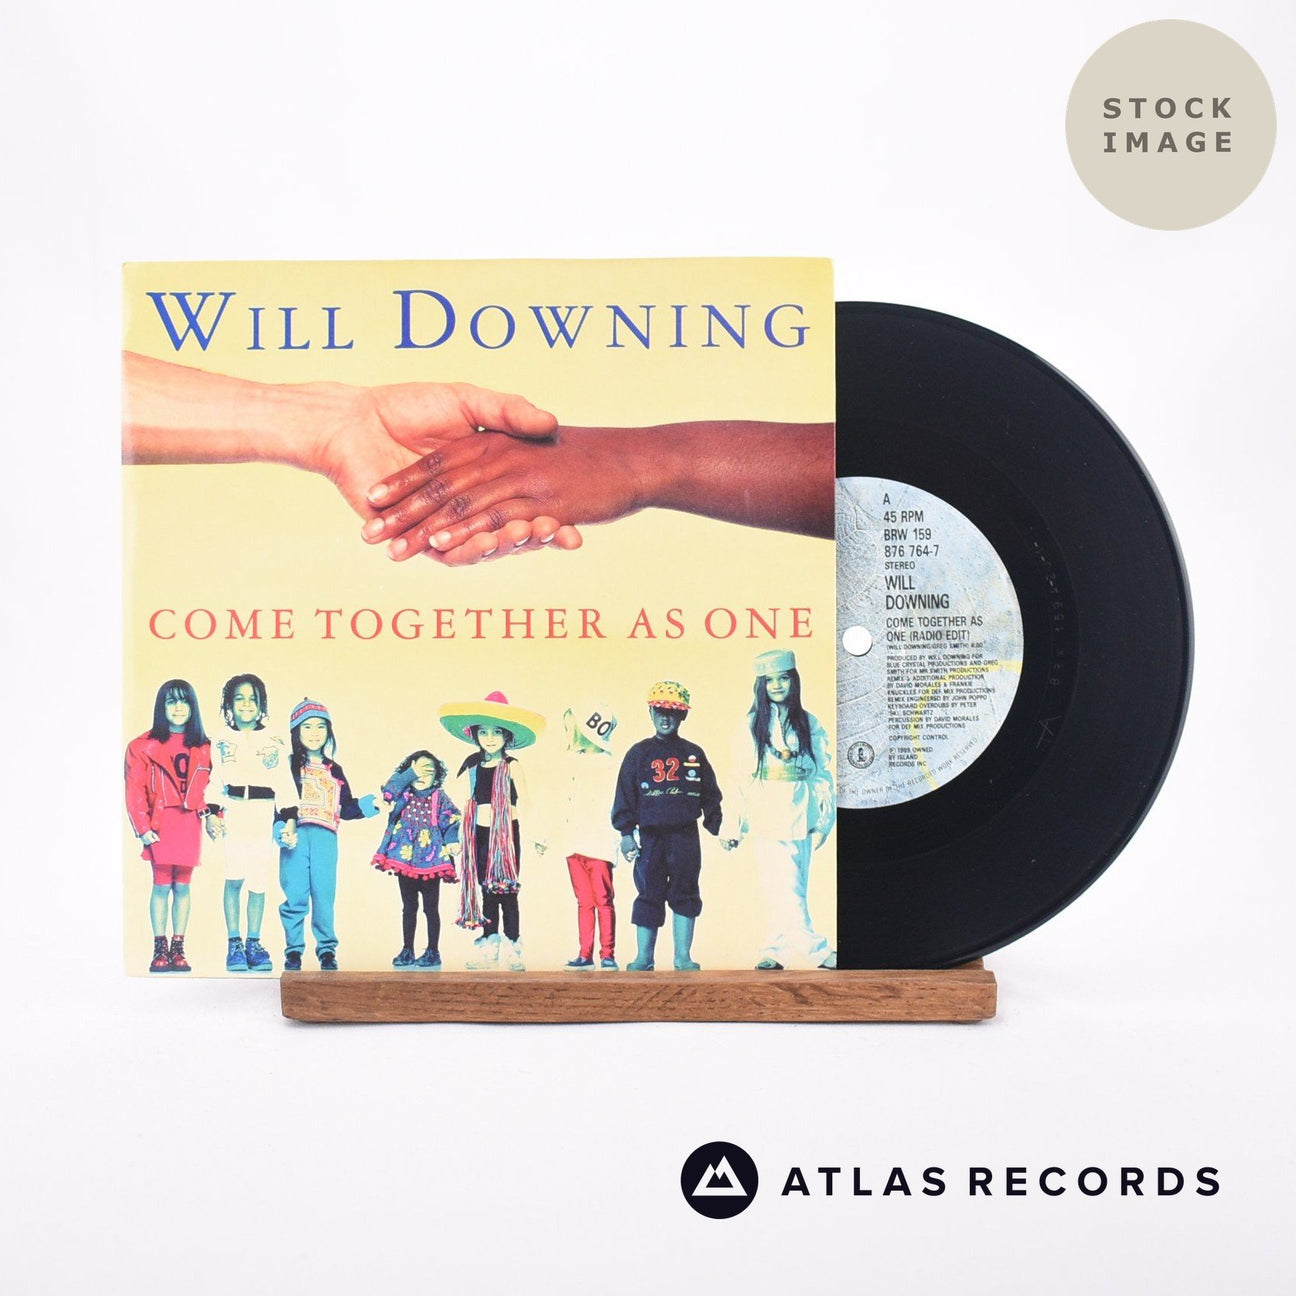 Will Downing Come Together As One 7" Vinyl Record - Sleeve & Record Side-By-Side